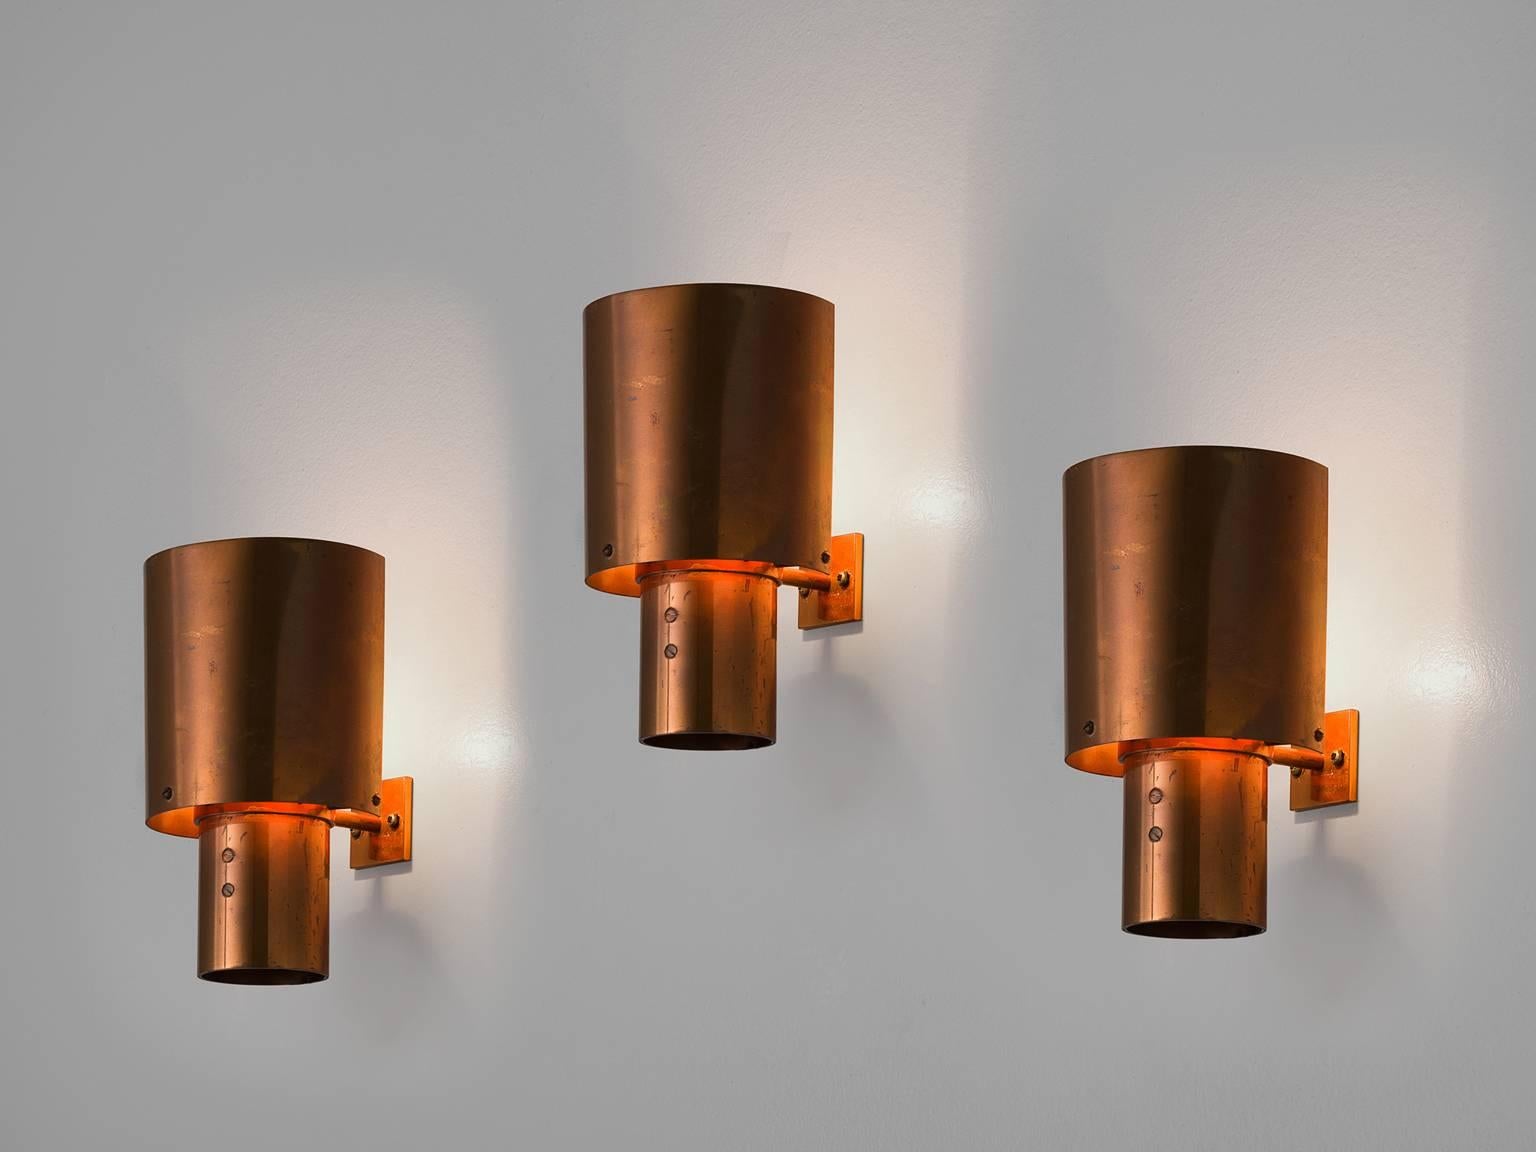 Set of three sconces, in copper, Europe, 1970s. 

Set of three copper wall lights. These lights have a simplistic design that resembles the style of the Danish architect Halldor Gunnløgsson. The focus lies completely on the material. The copper